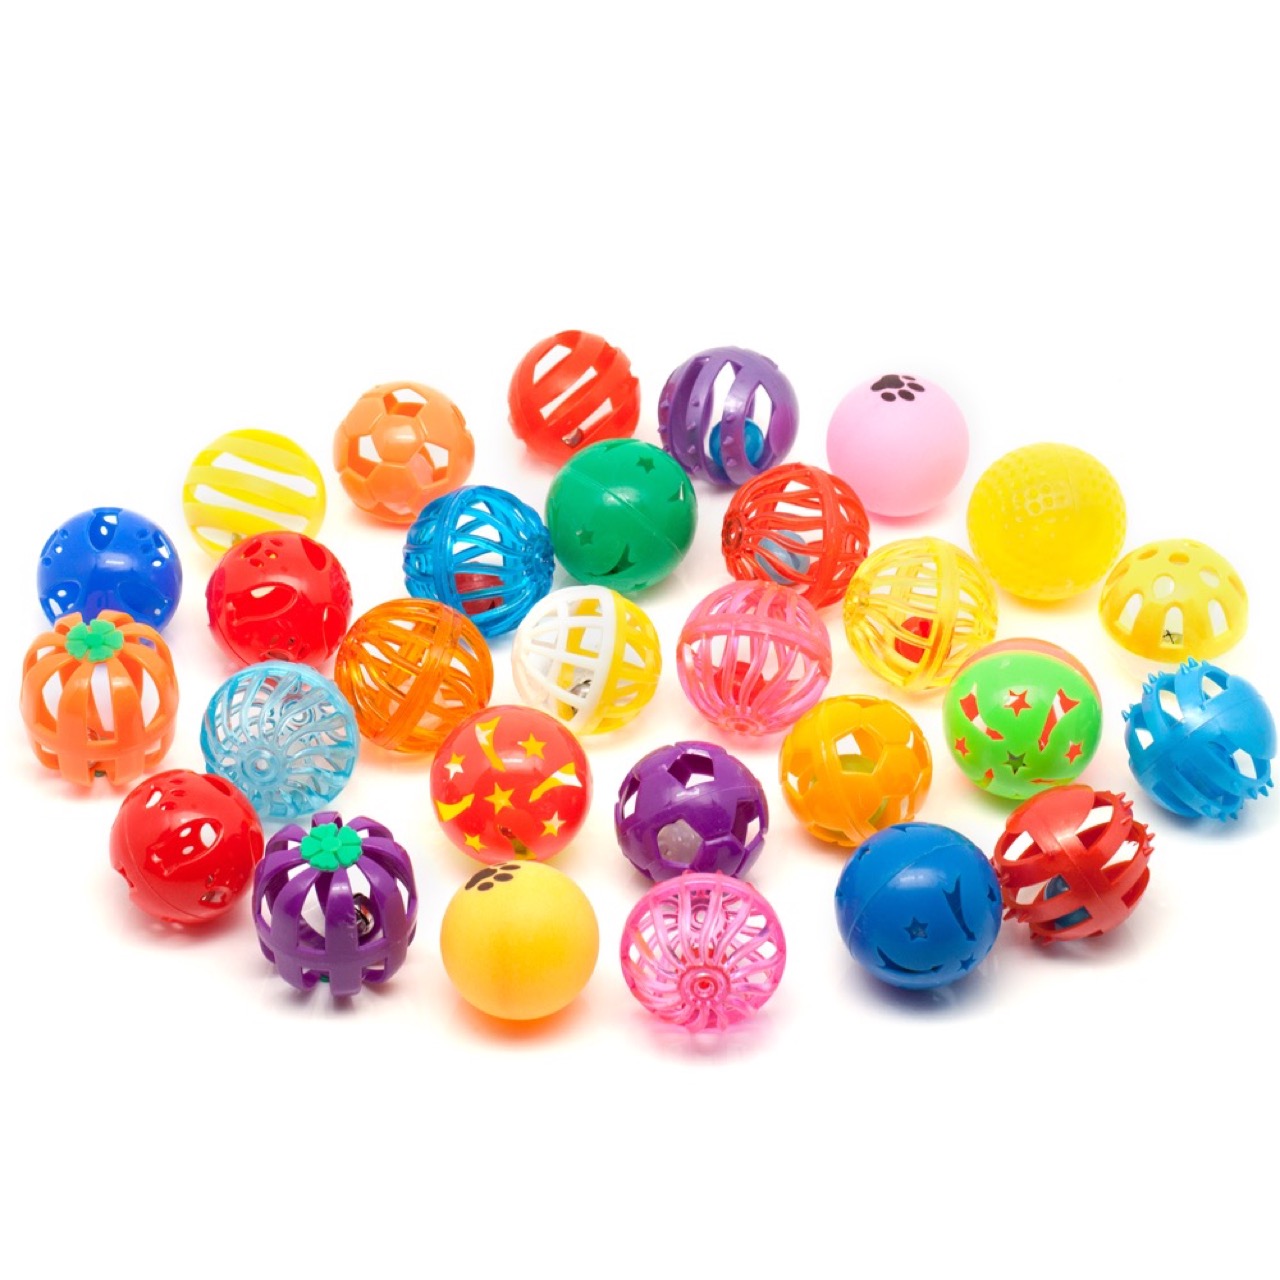 Demiawaking 10Pcs Plastic Colorful Cat Balls with Bells Sound Ball Fun Activity Play Toy Interactive for Cat Kitten Pets